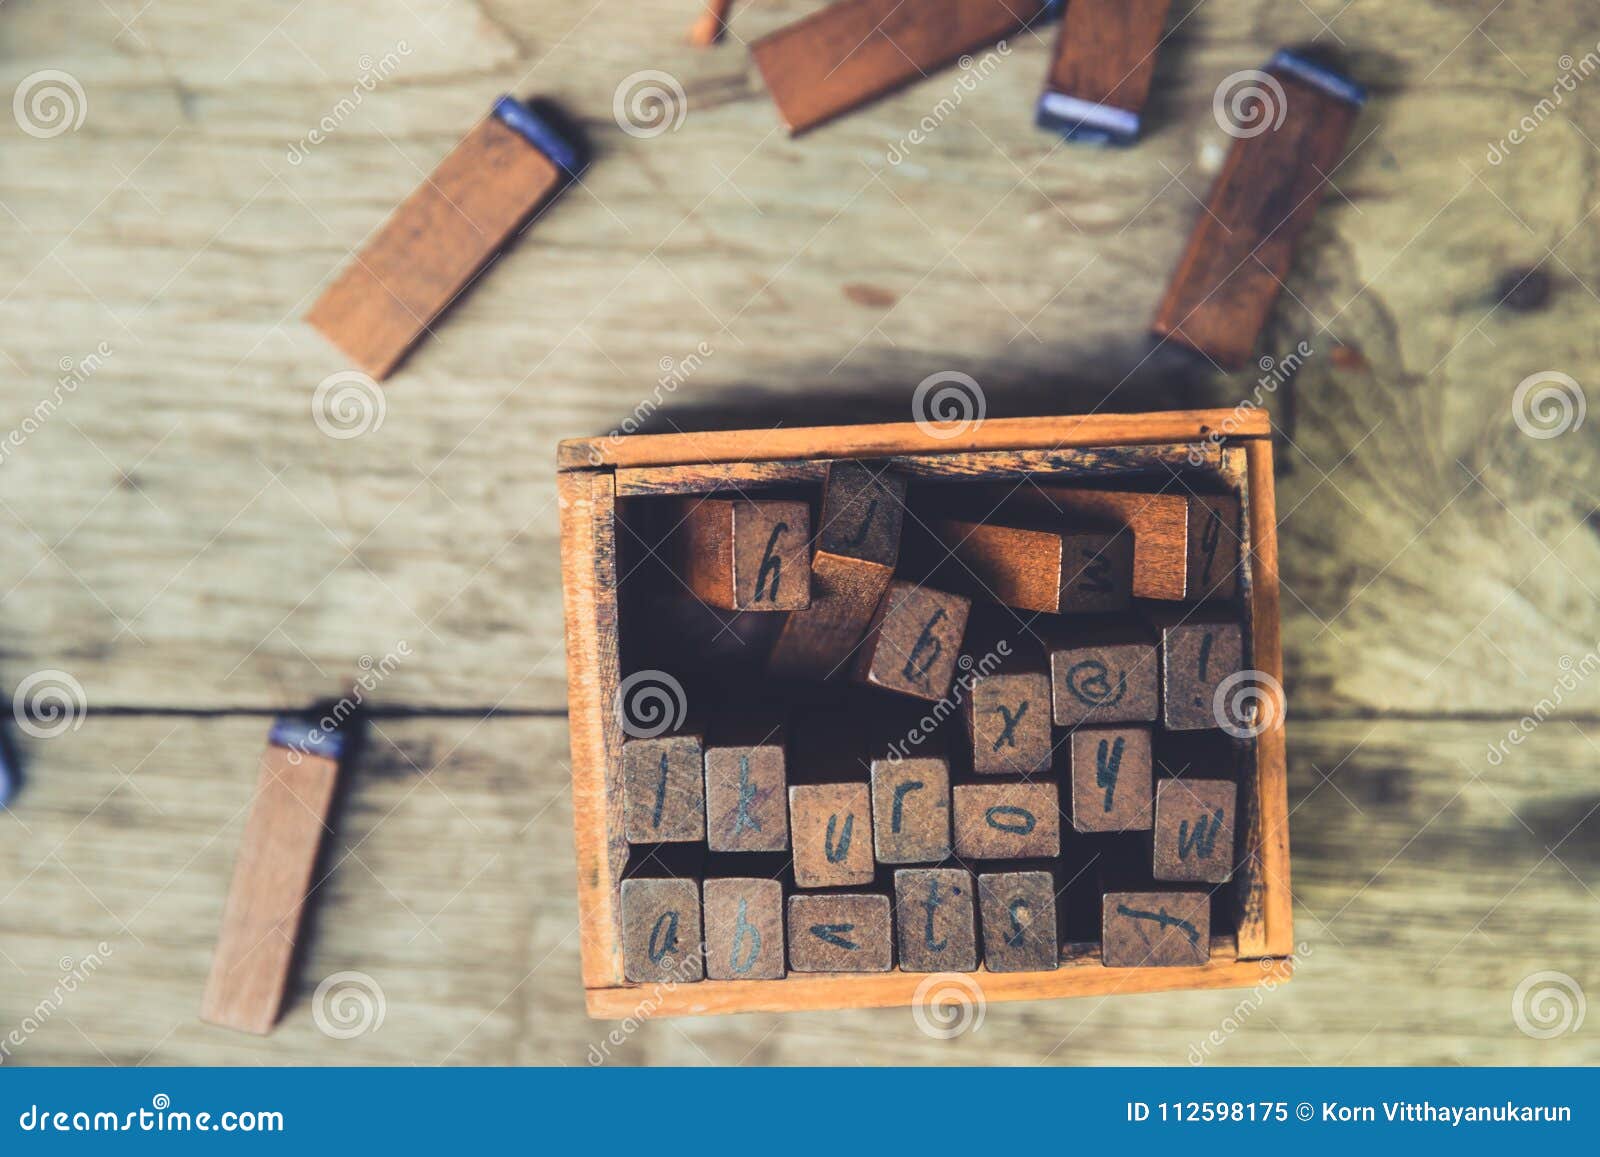 linguistic education concept: wooden text rubber stamp